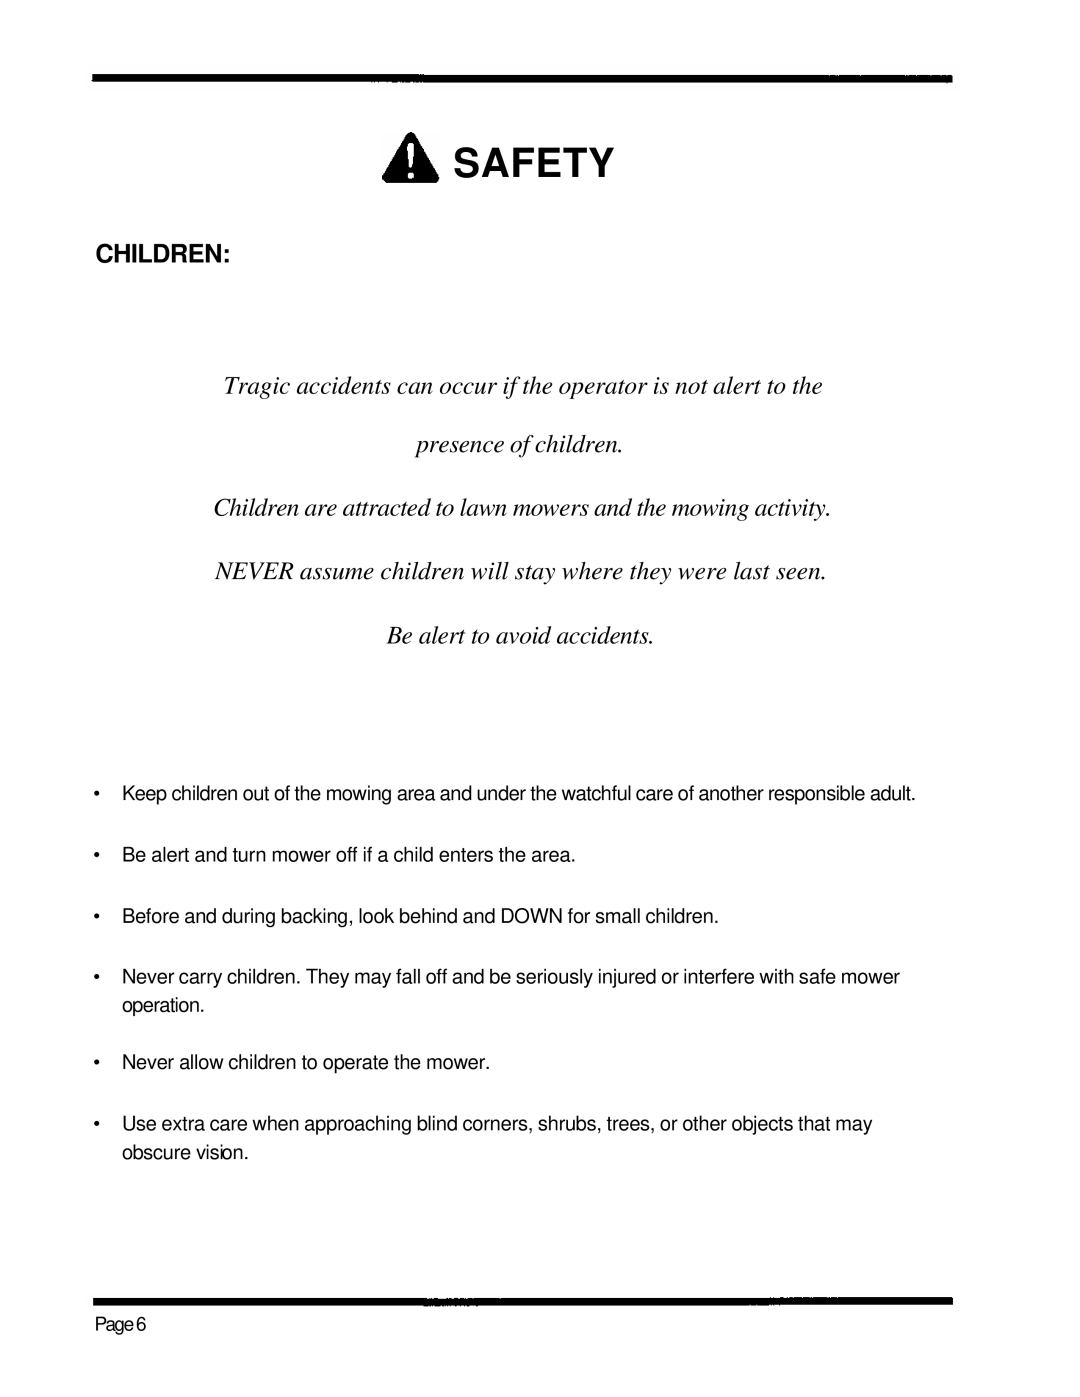 Dixon 5000 Series Children, Tragic accidents can occur if the operator is not alert to the, presence of children, Safety 